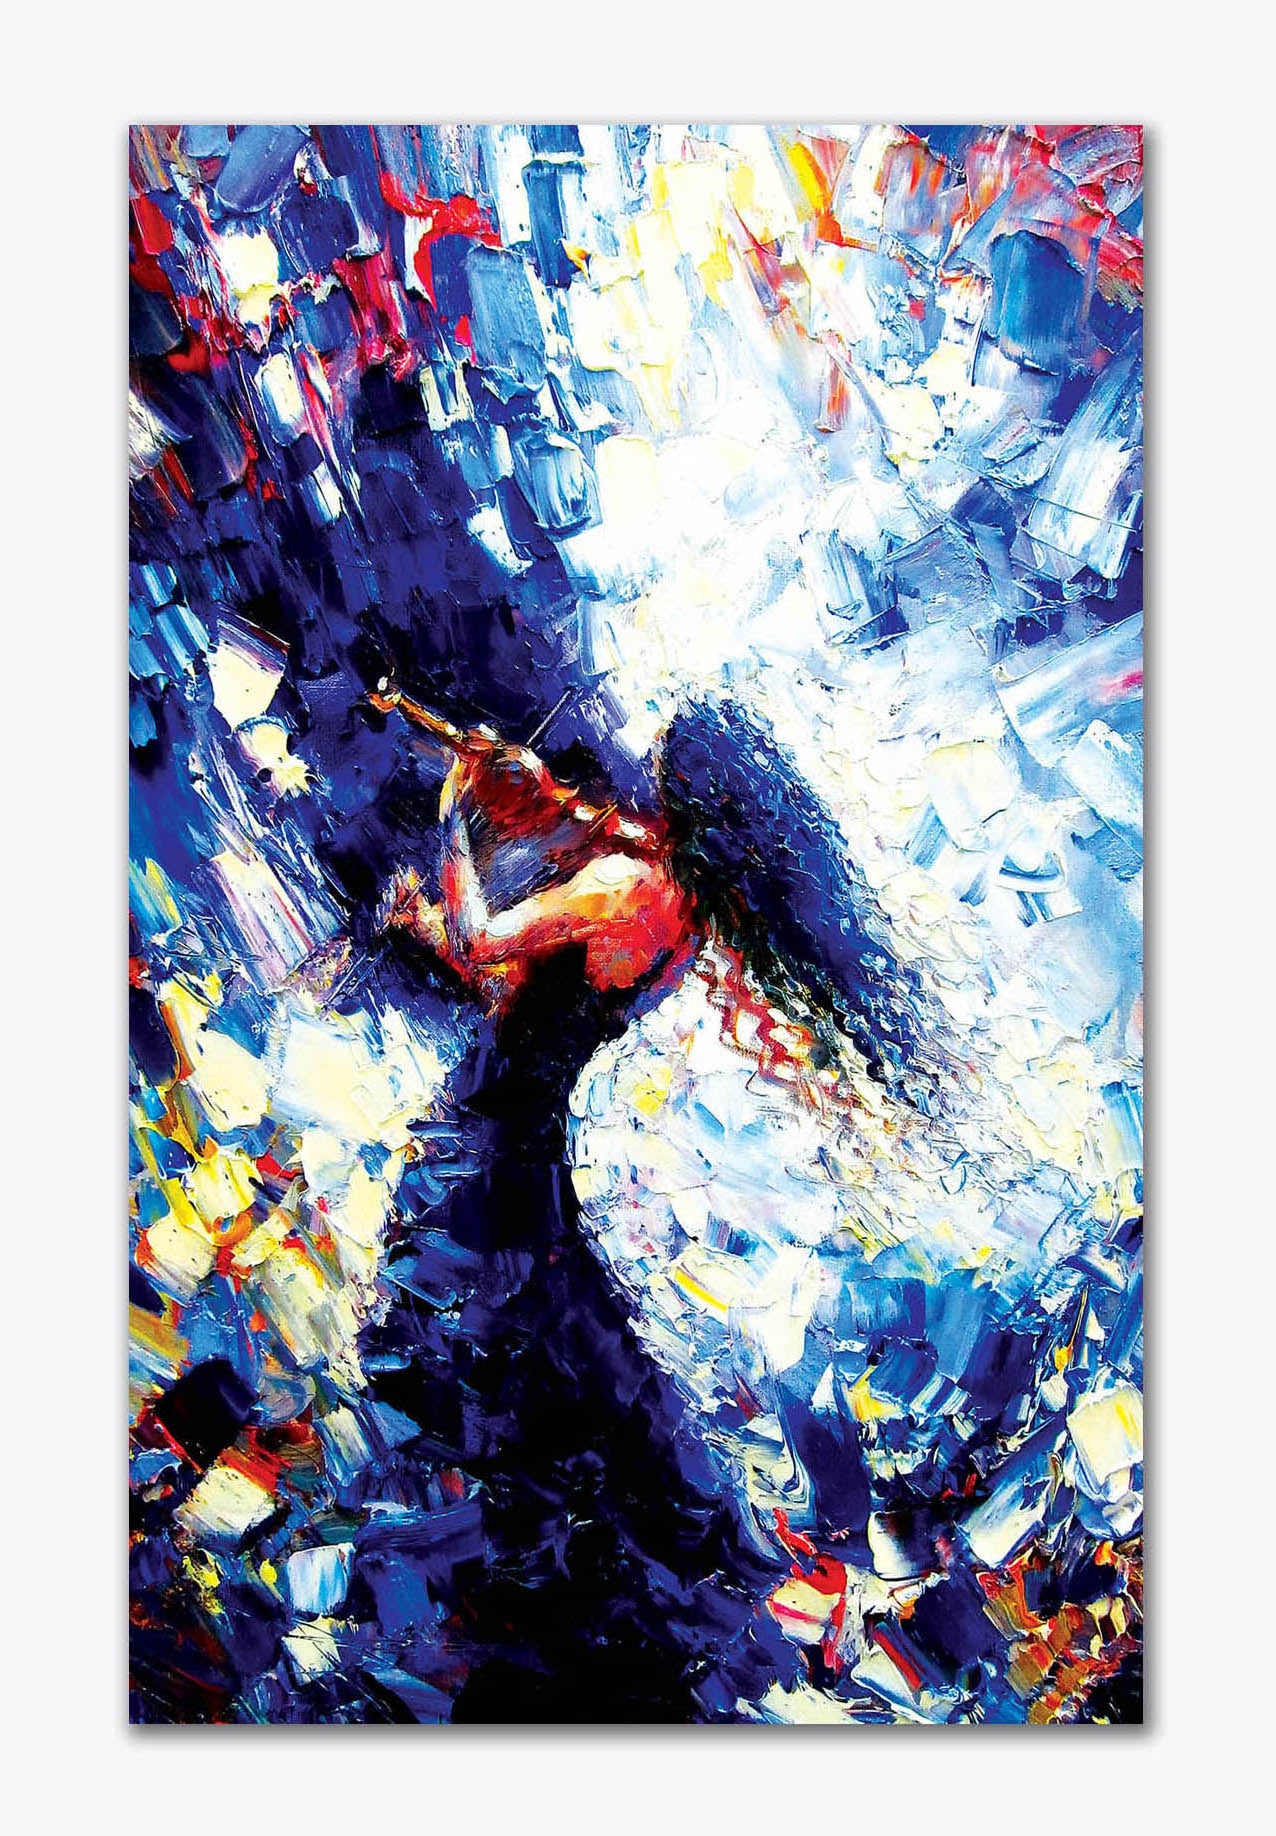 A Girl with Violin  - Canvas Painting - Unframed